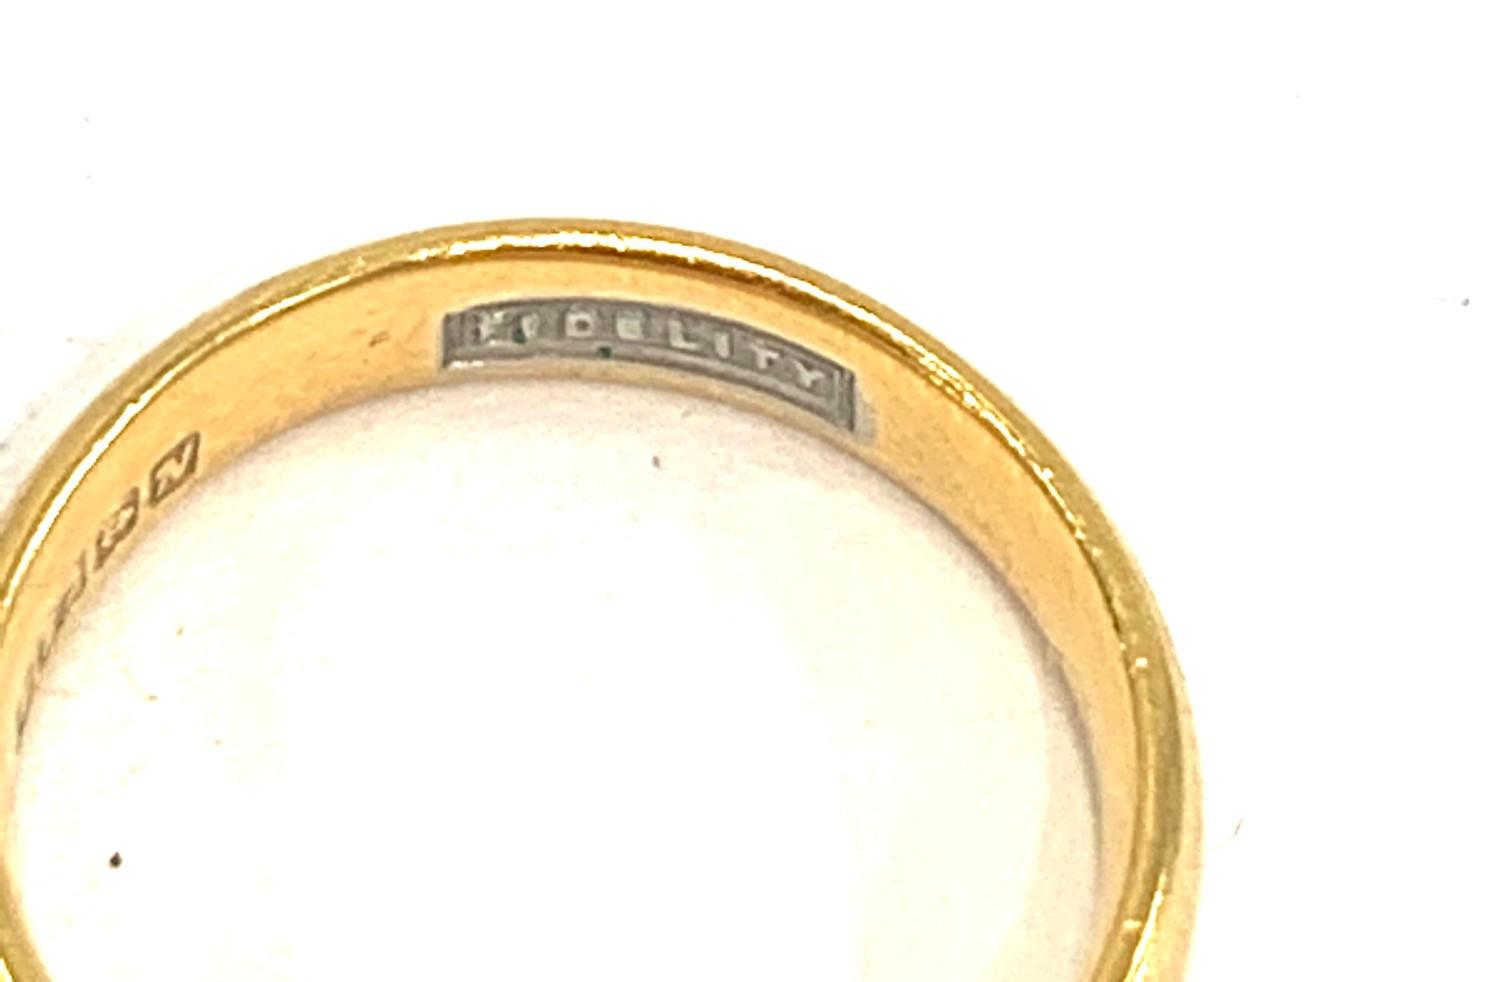 22ct Yellow gold plain fidelity band, approximate weight 3.6g - Image 3 of 3